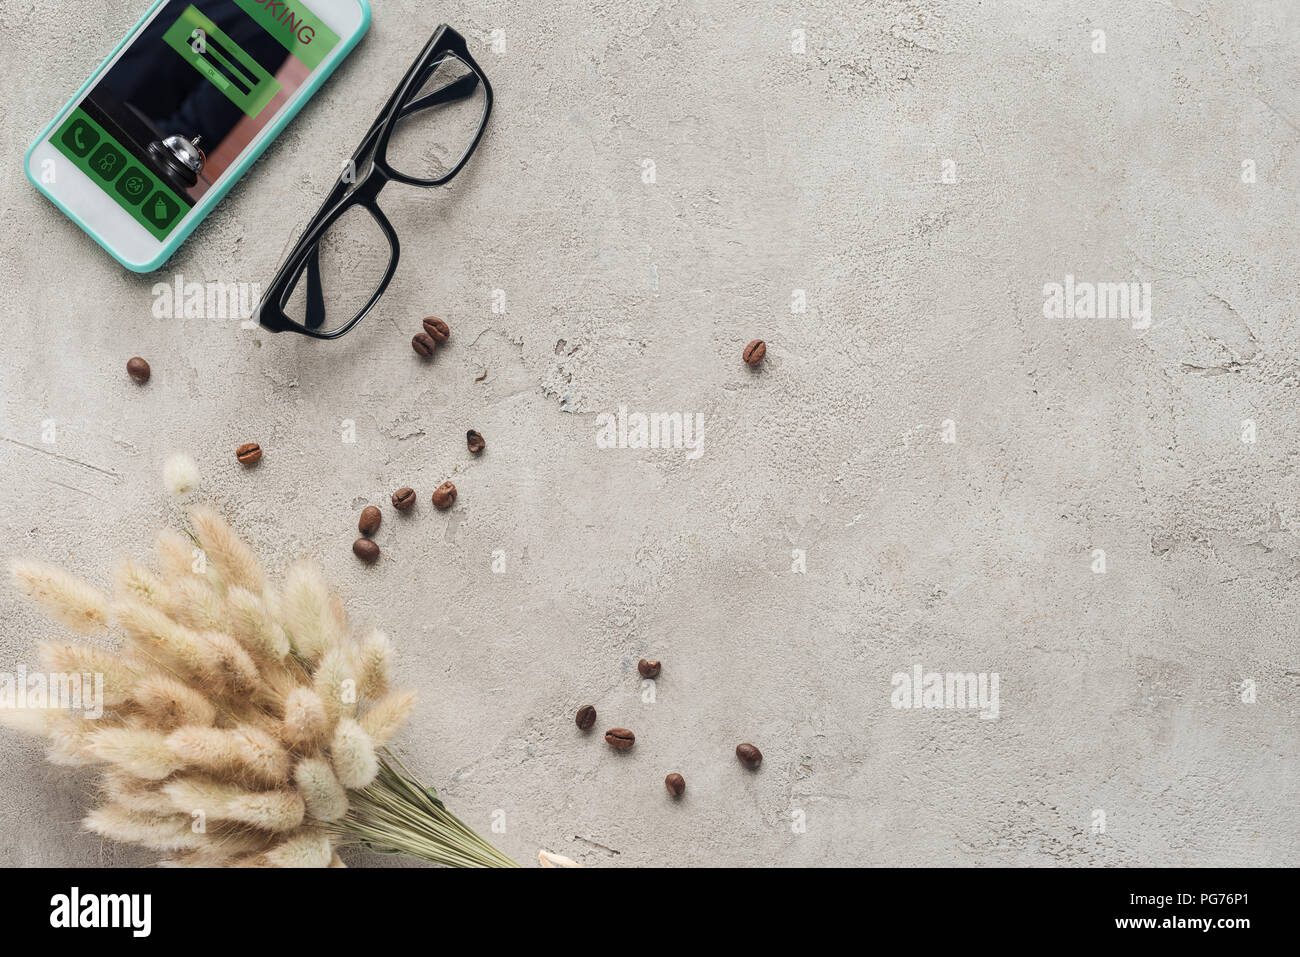 top view of smartphone with booking app on screen with eyeglasses, spilled coffee beans and lagurus ovatus bouquet on concrete surface Stock Photo